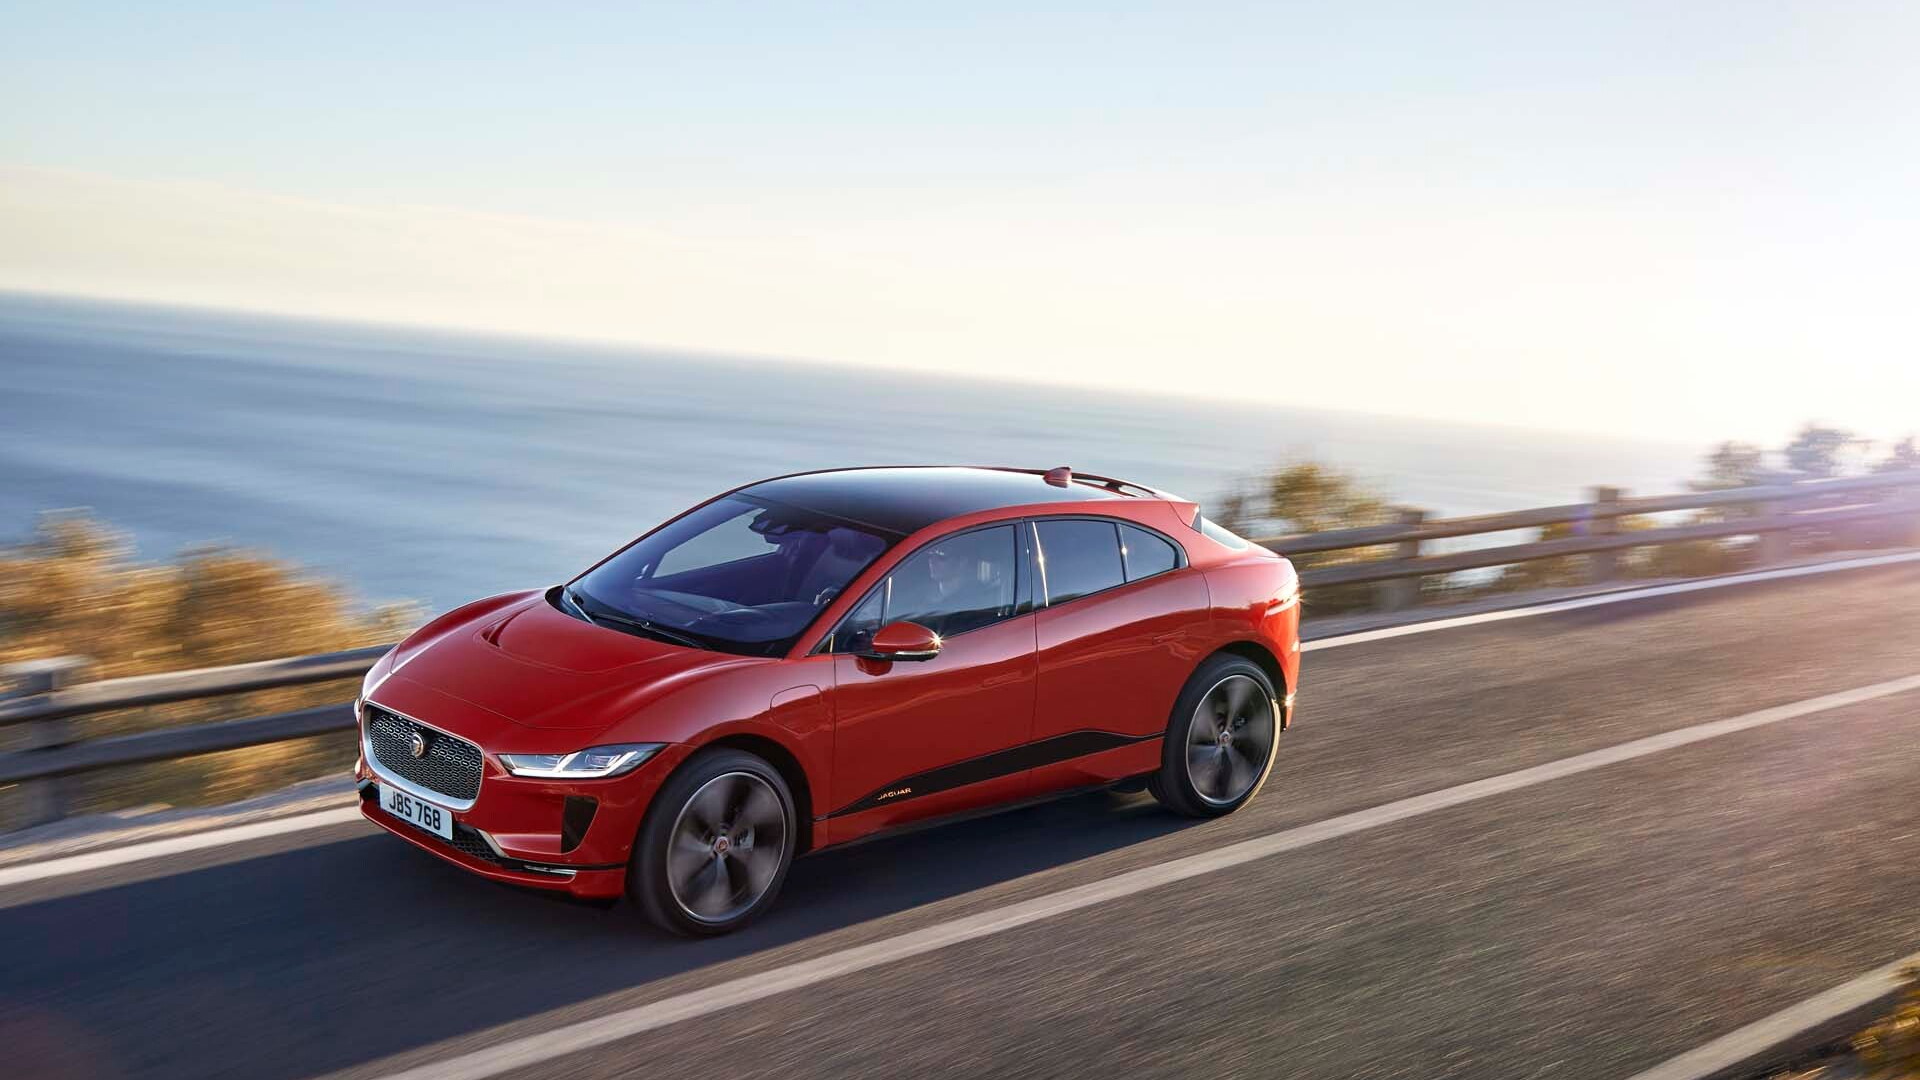 2019 Jaguar I-Pace electric crossover debuts in production ...